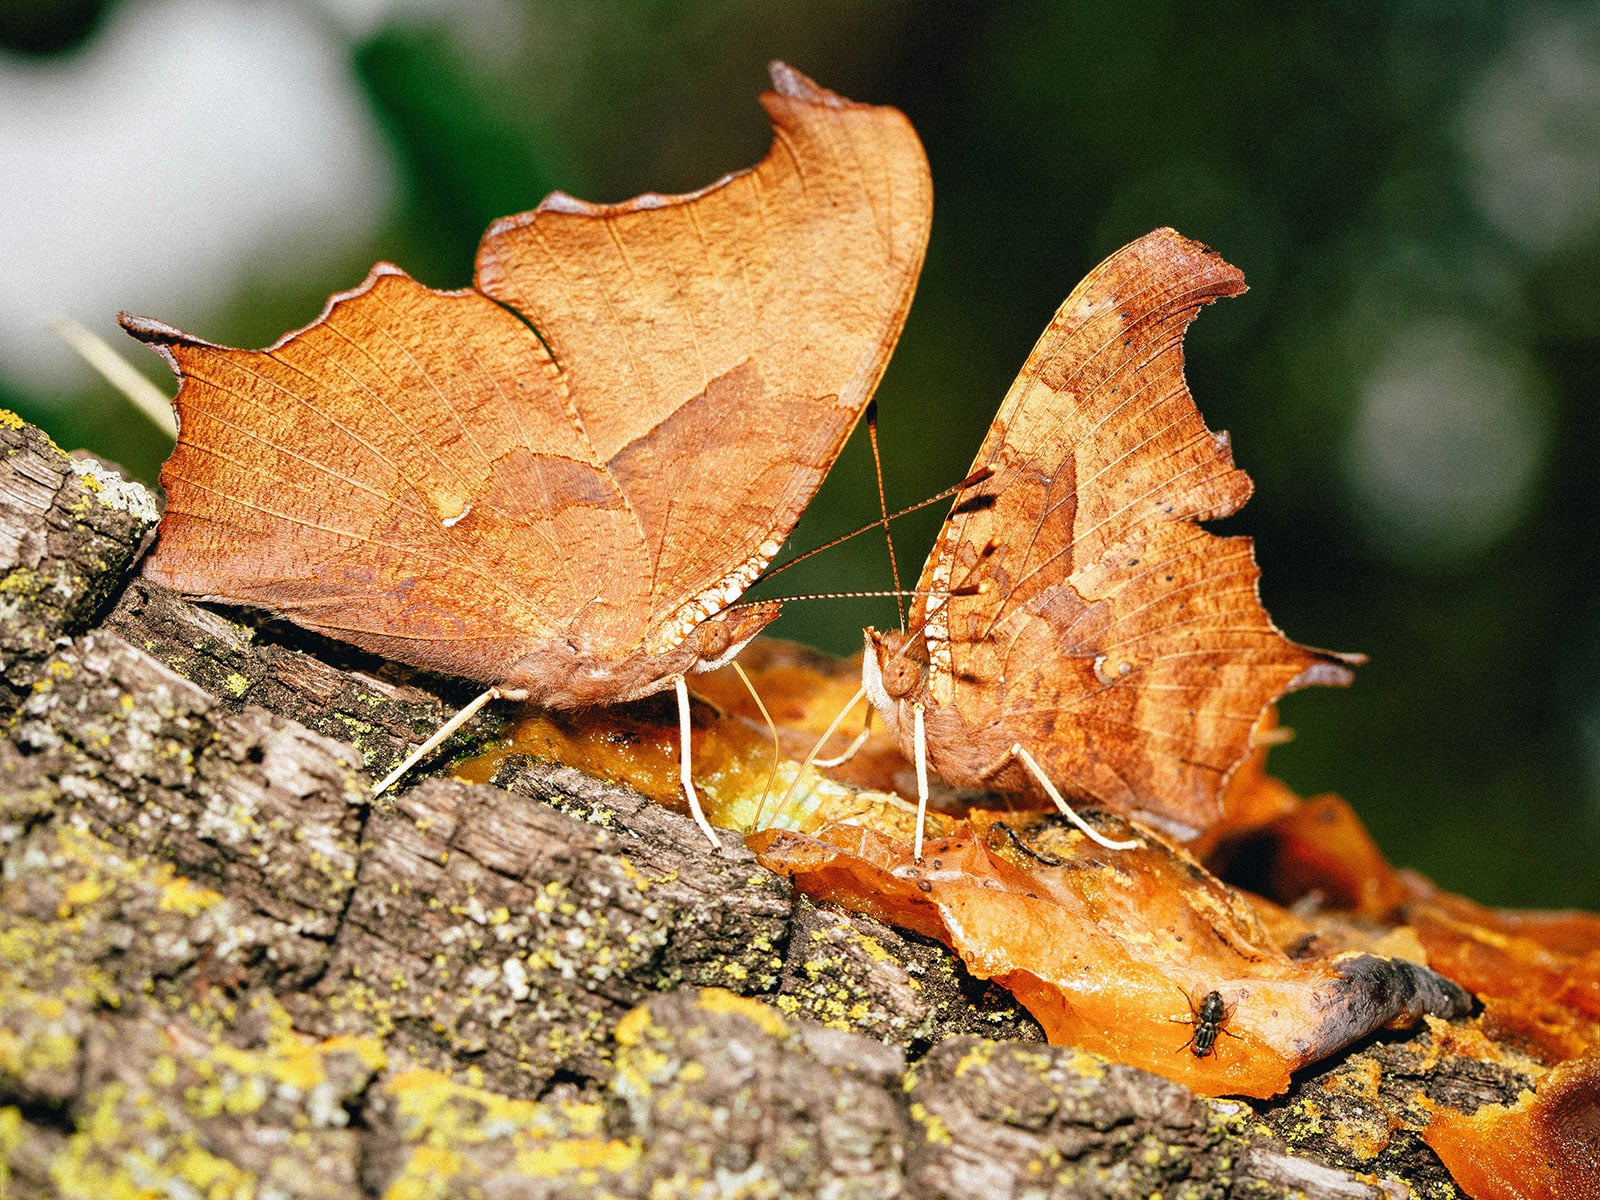 Two question mark butterflies that resembled brown leaves, resting on a piece of wood